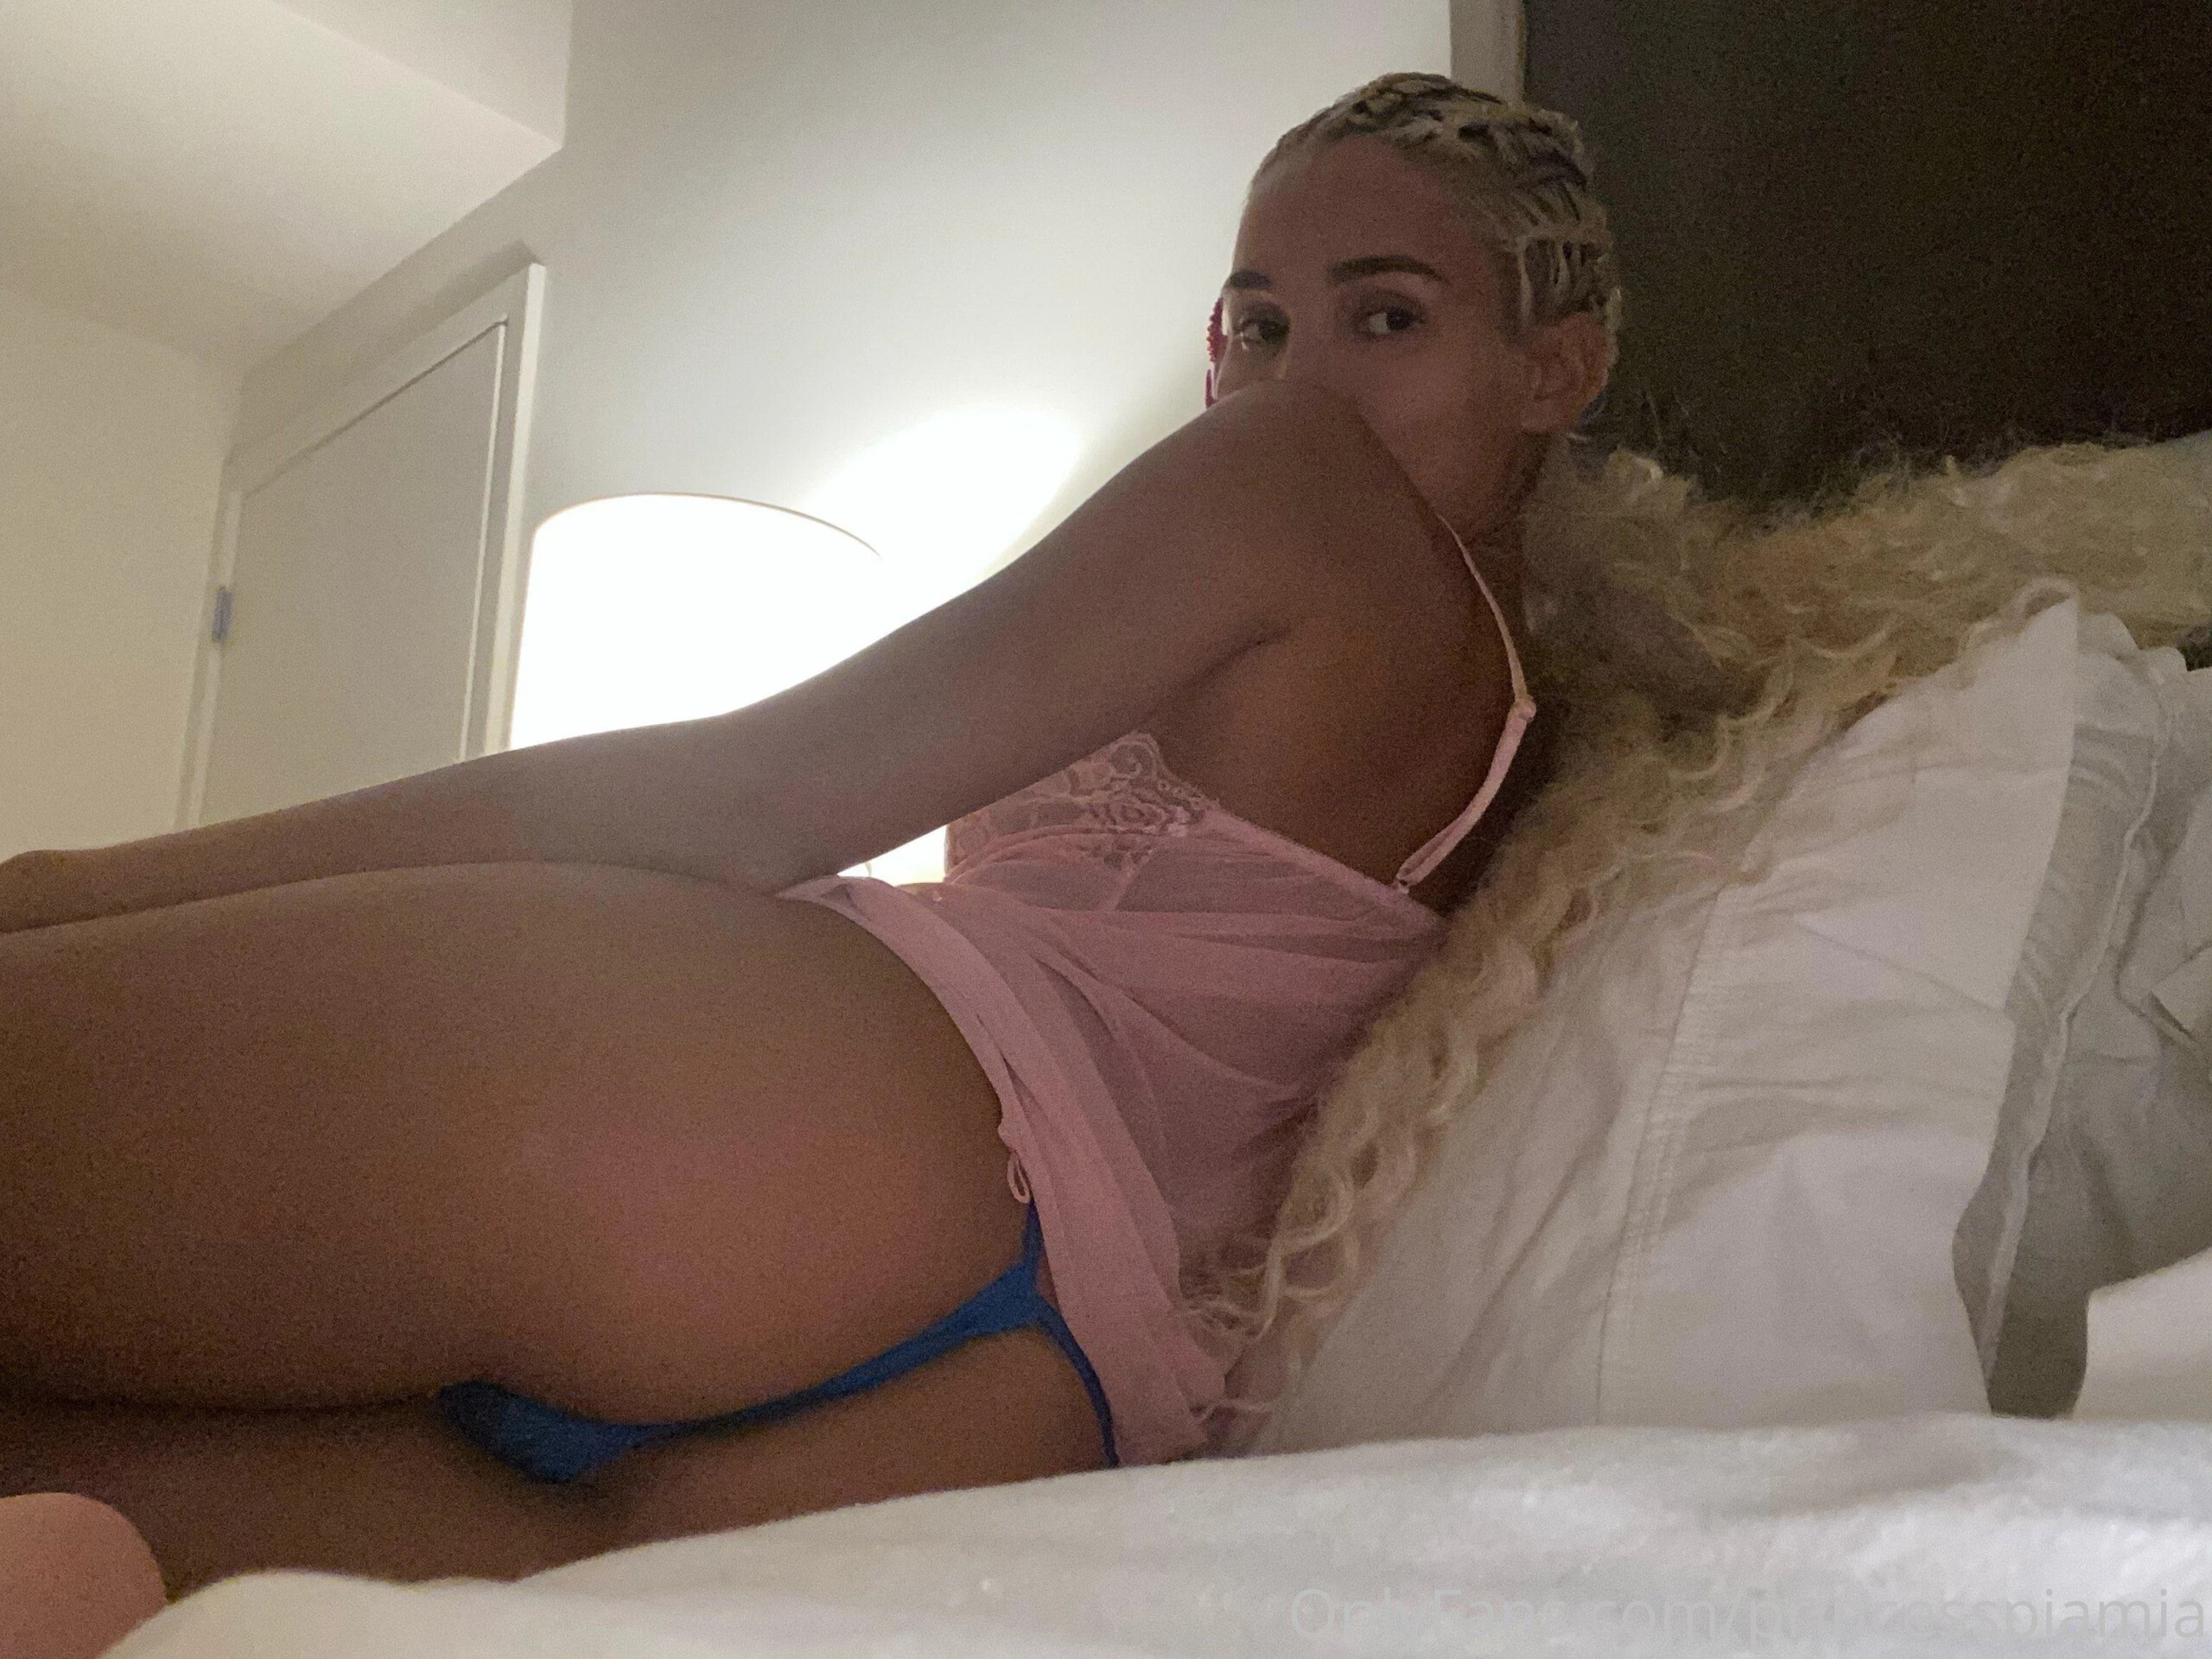 Pia Mia Perez - Fantastic Boobs and Ass in a Racy Pictures. 